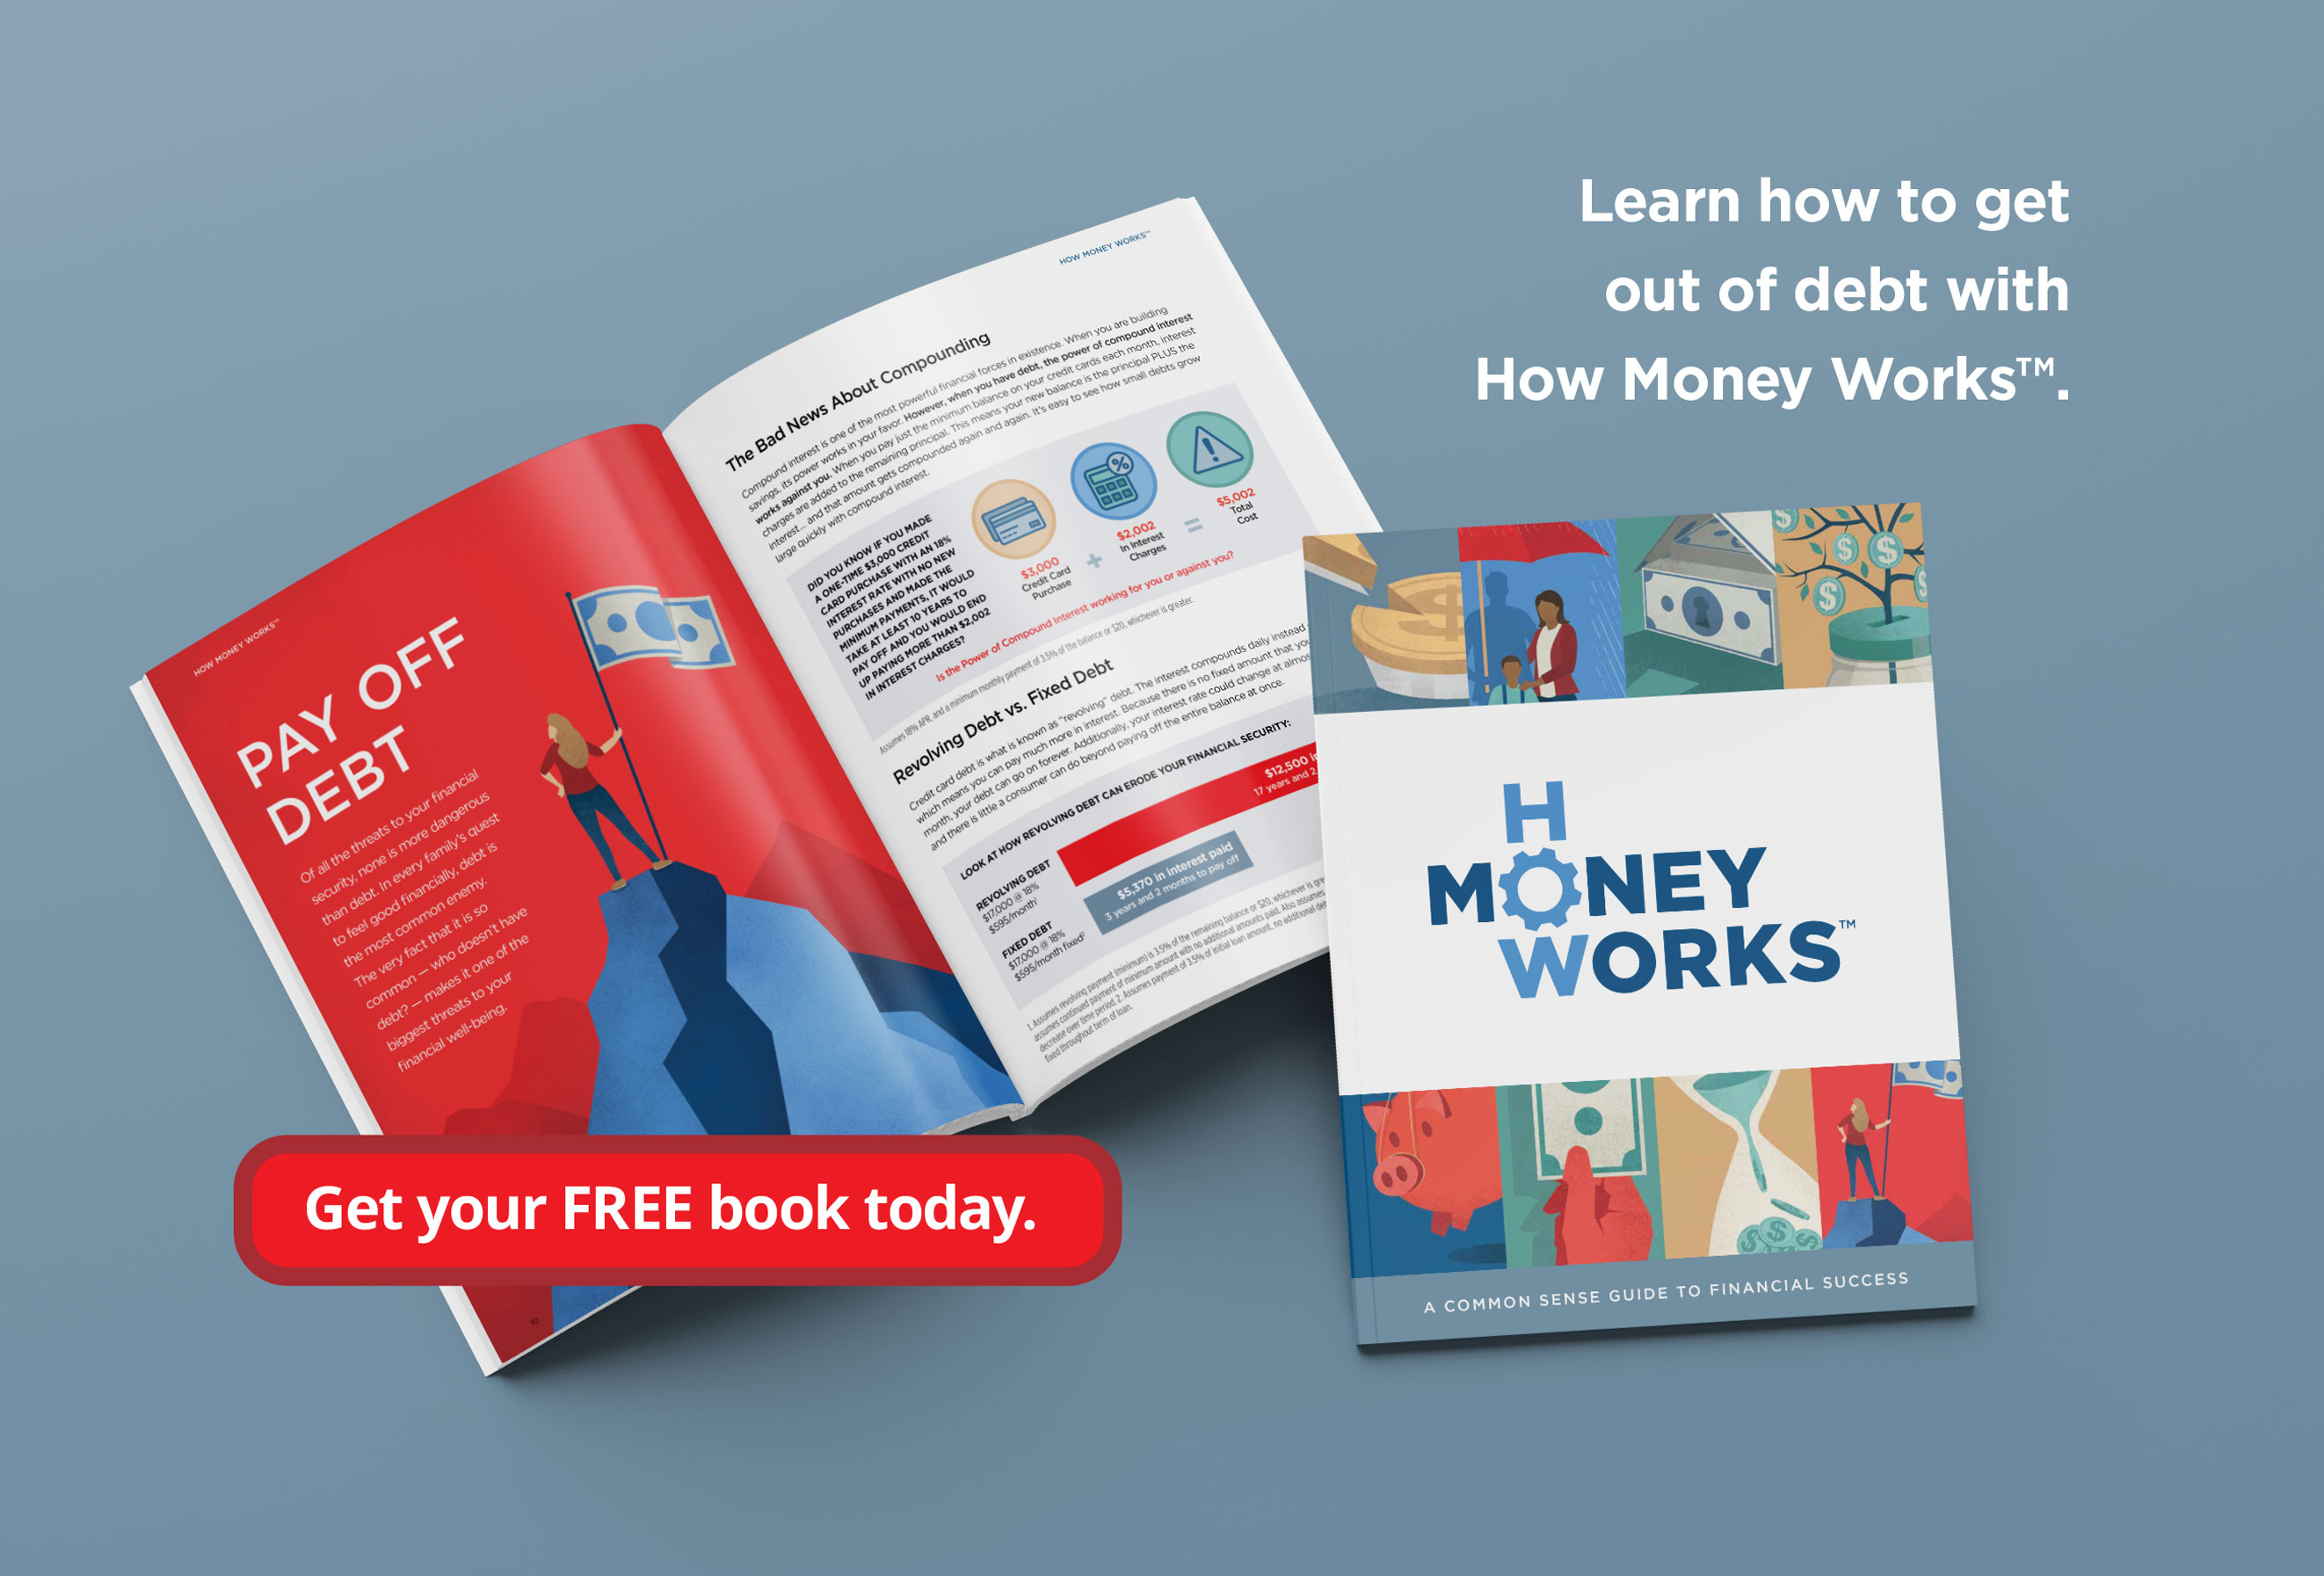 Beaten down by debt? Learn your way out with How Money Works™. Get Your FREE copy today!